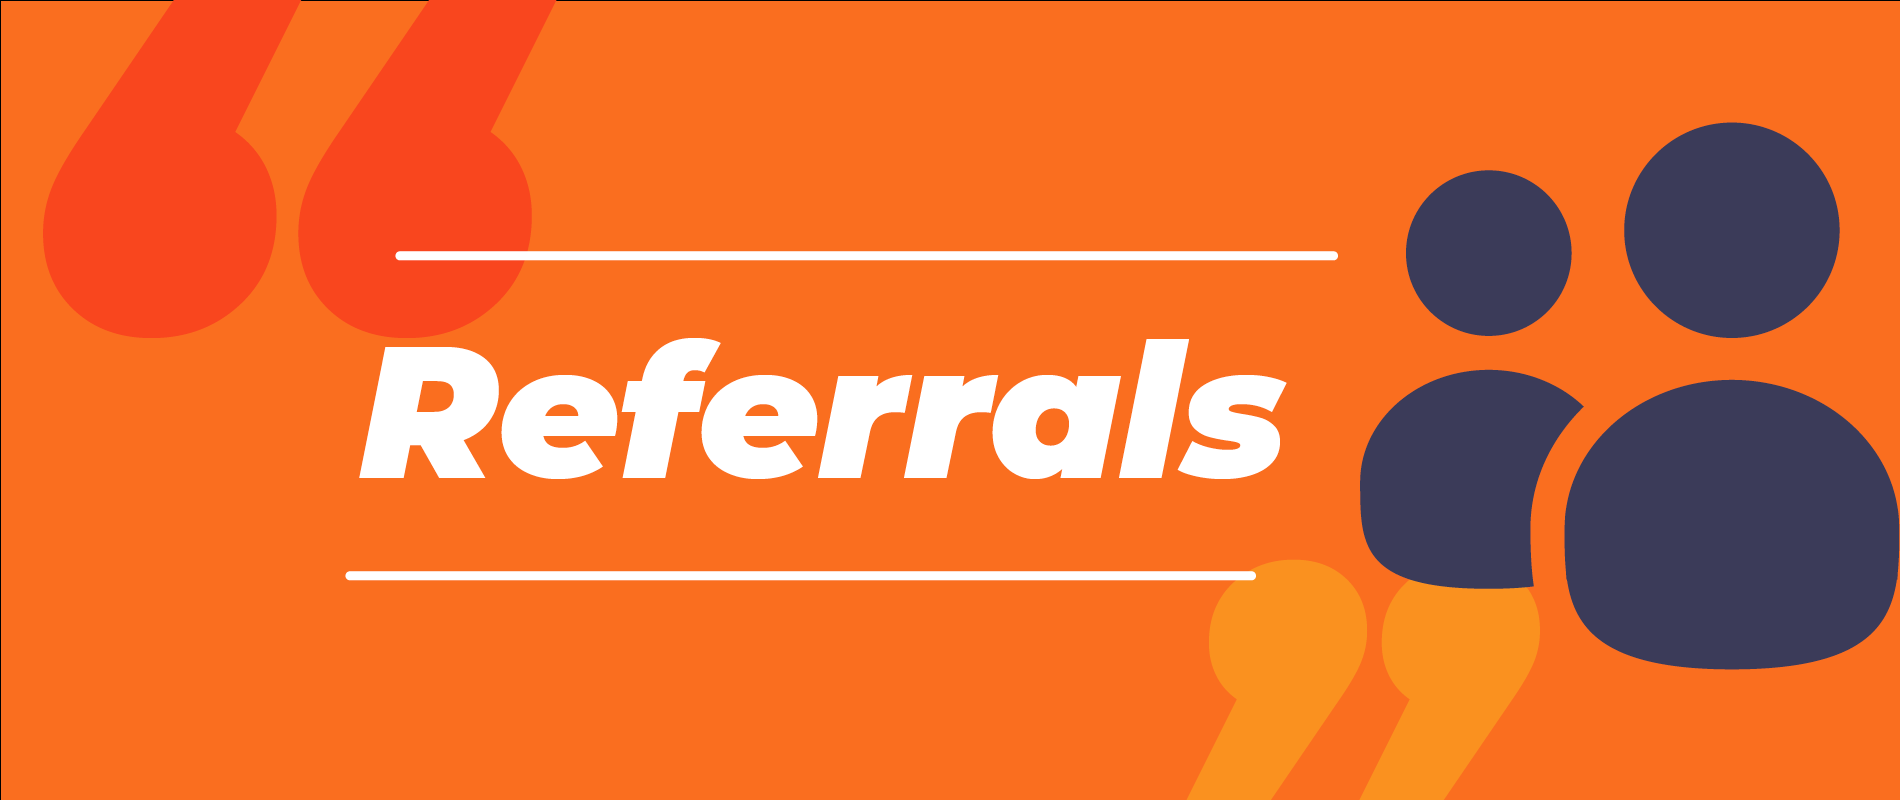 How To Grow Your Userbase With Customer Referrals